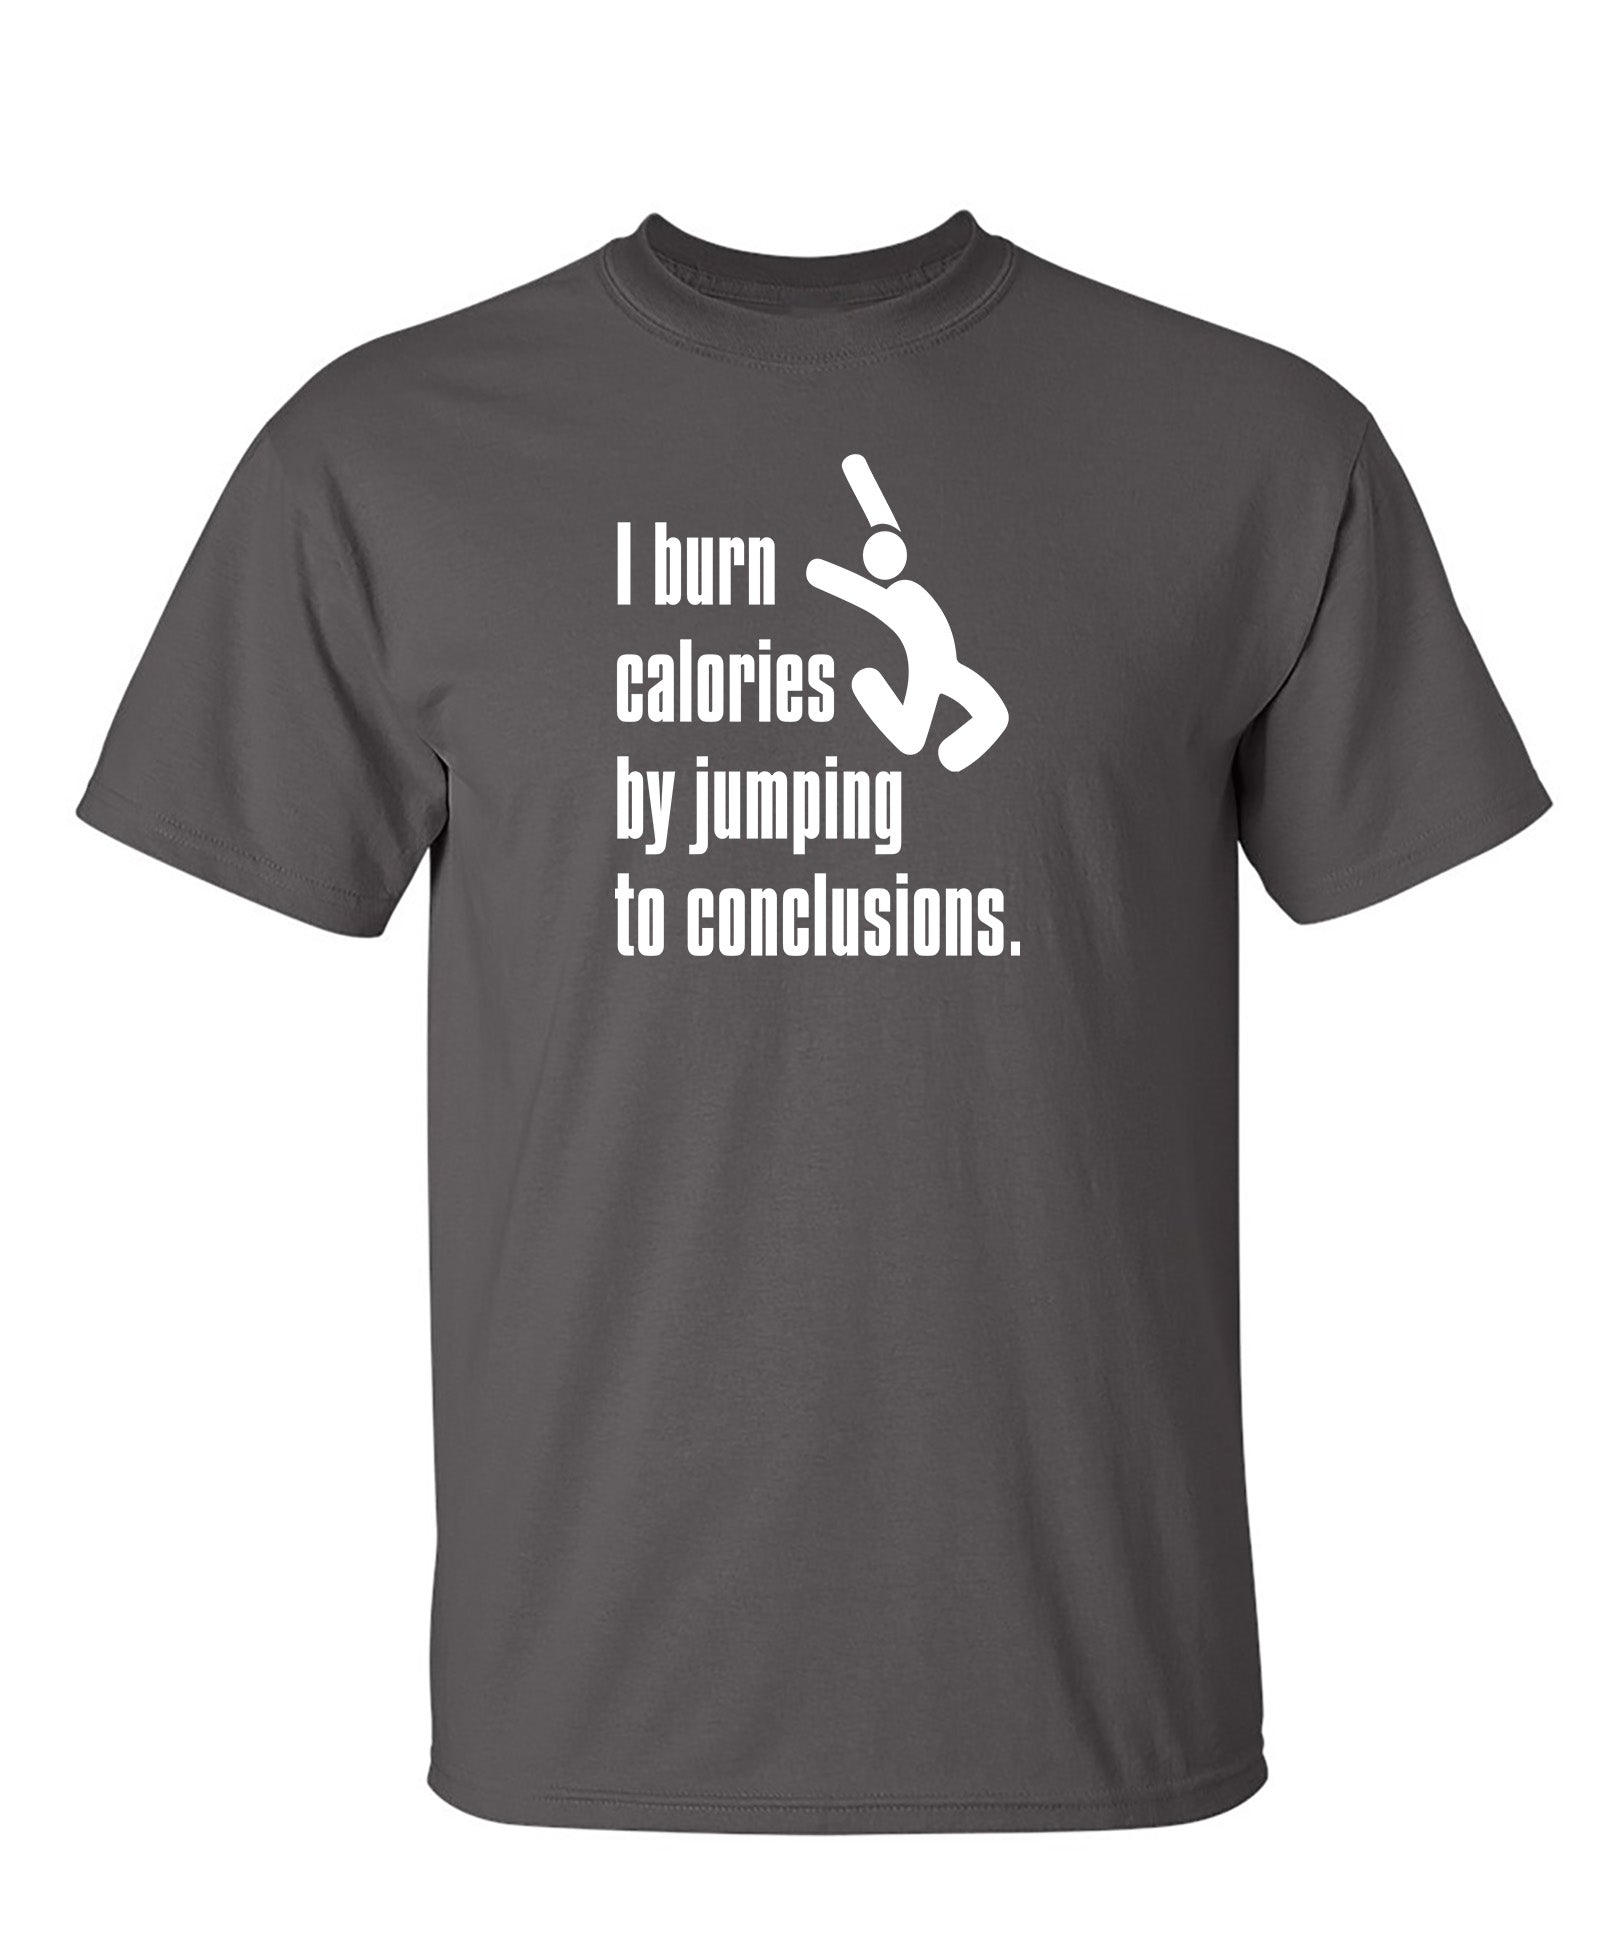 I Burn Calories By Jumping To Conclusions. - Funny T Shirts & Graphic Tees